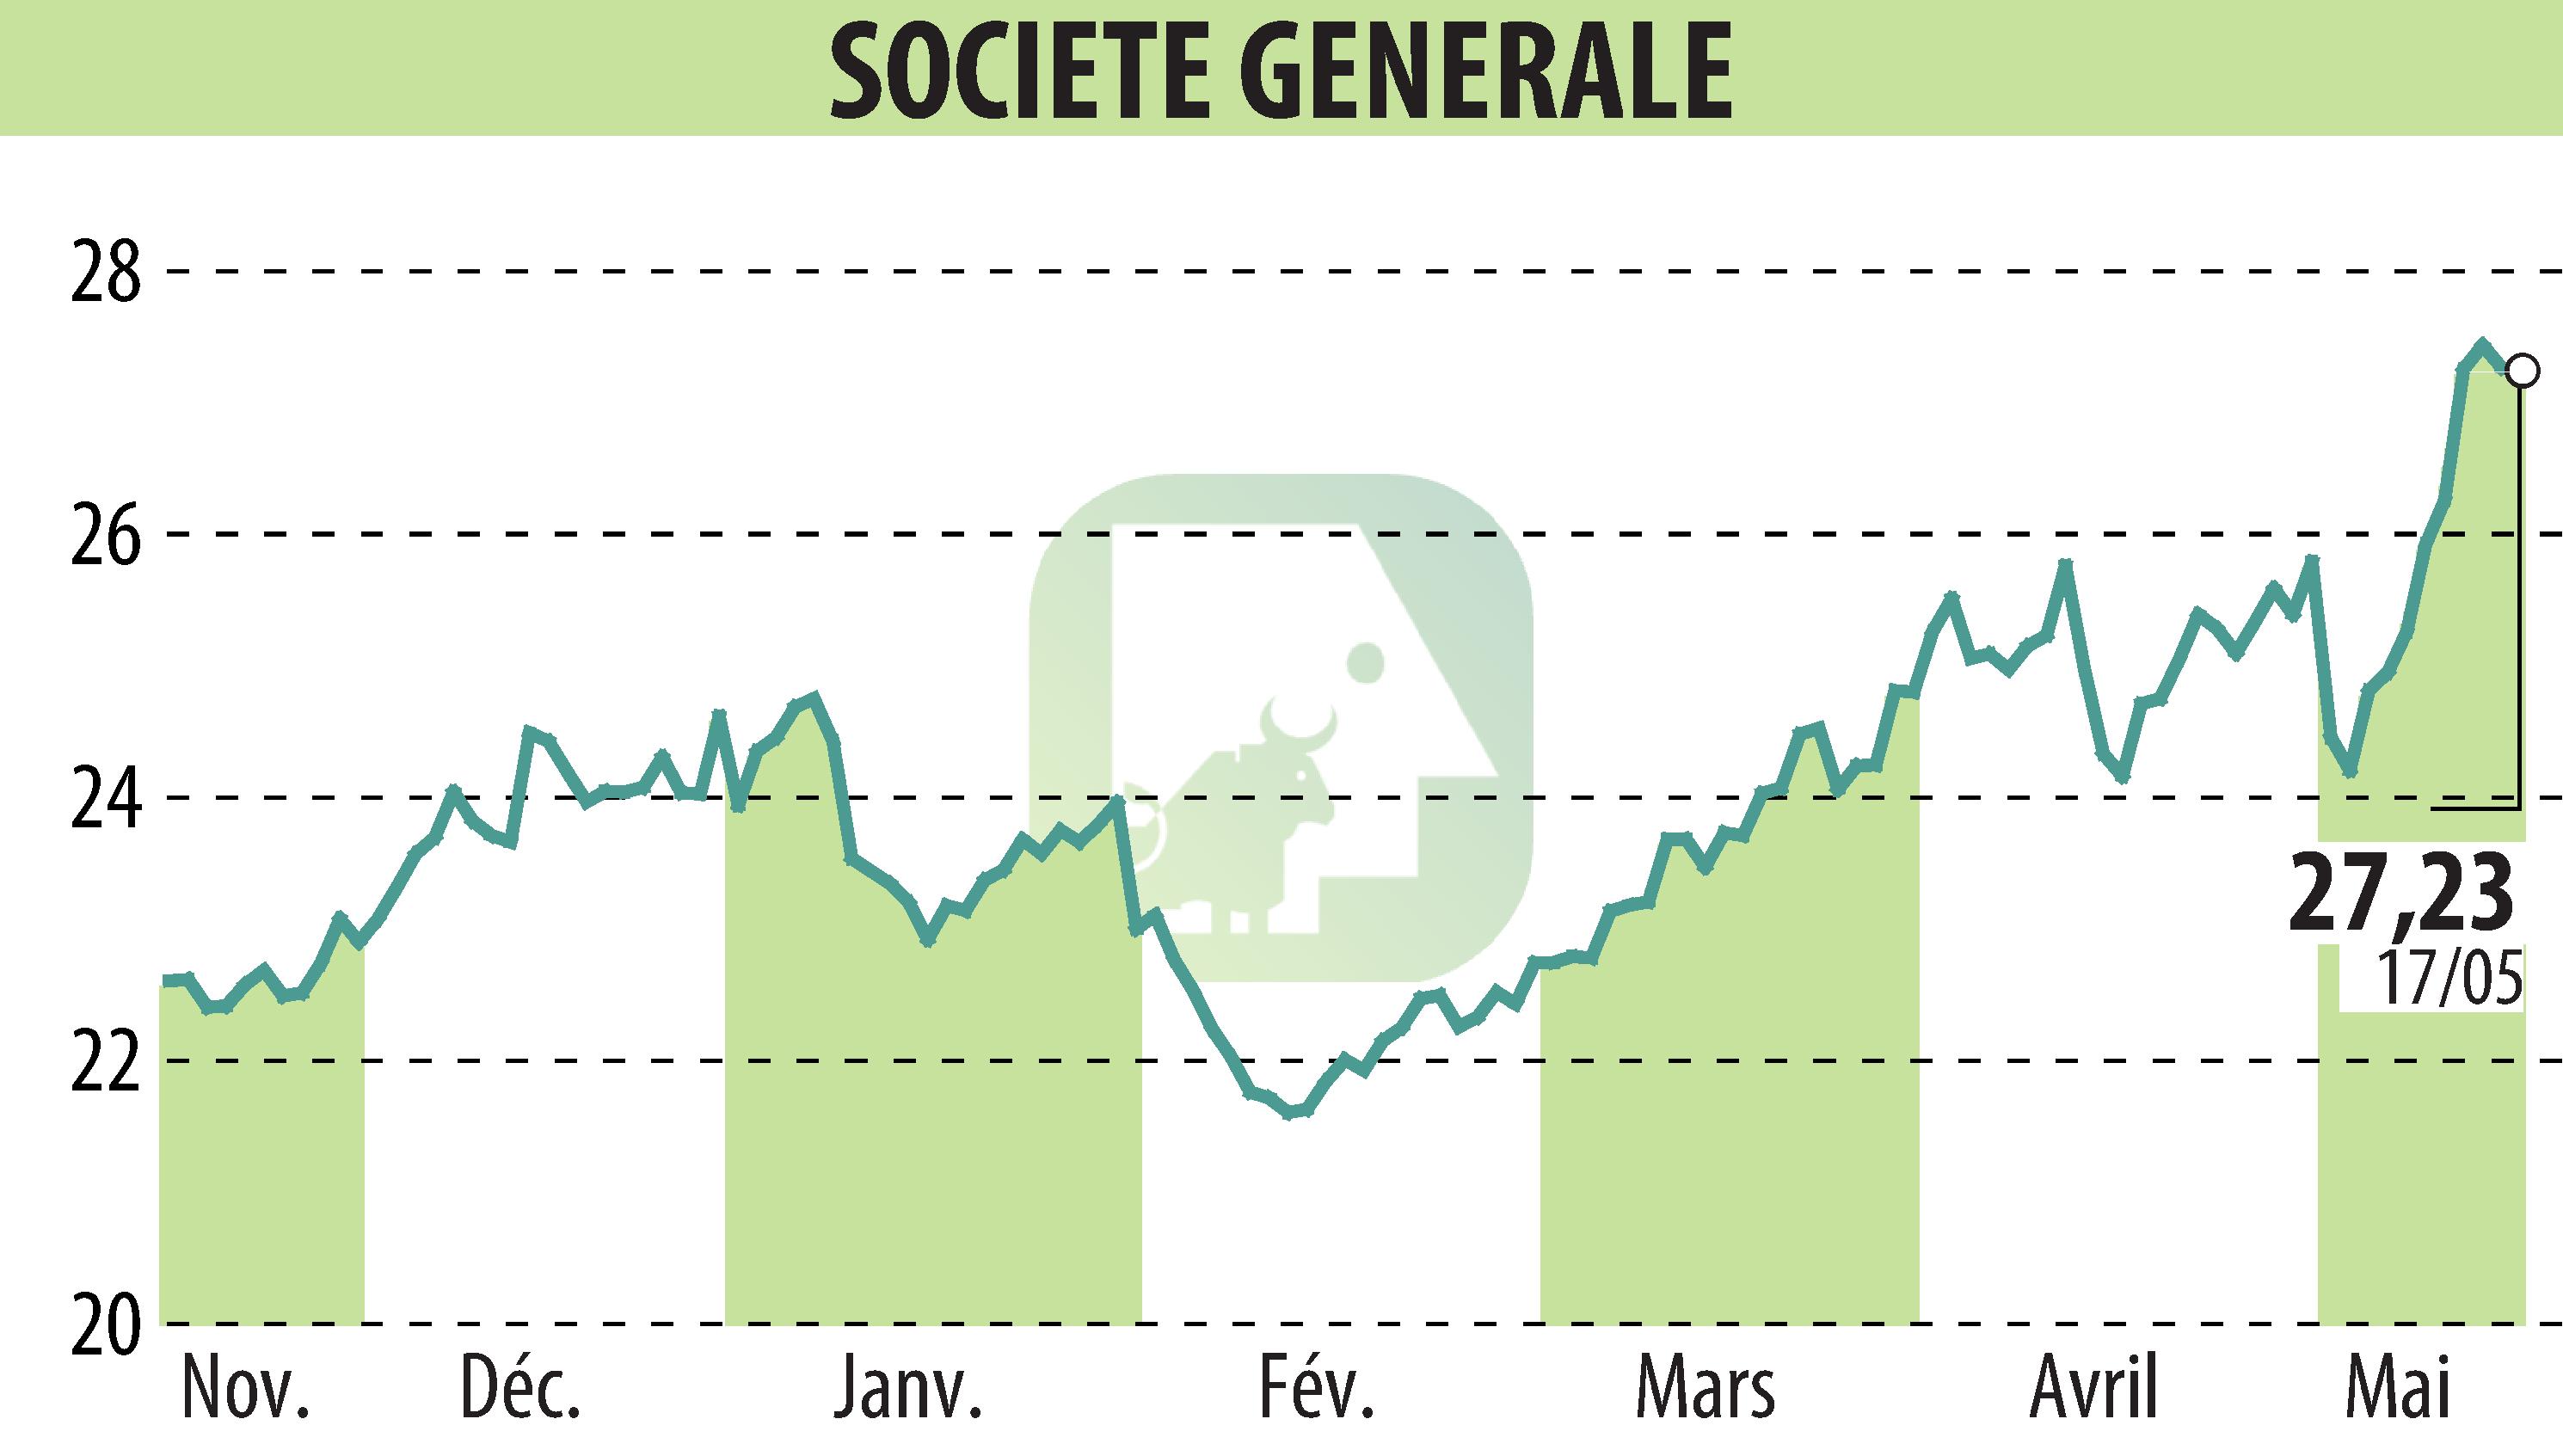 Stock price chart of SOCIETE GENERALE (EPA:GLE) showing fluctuations.